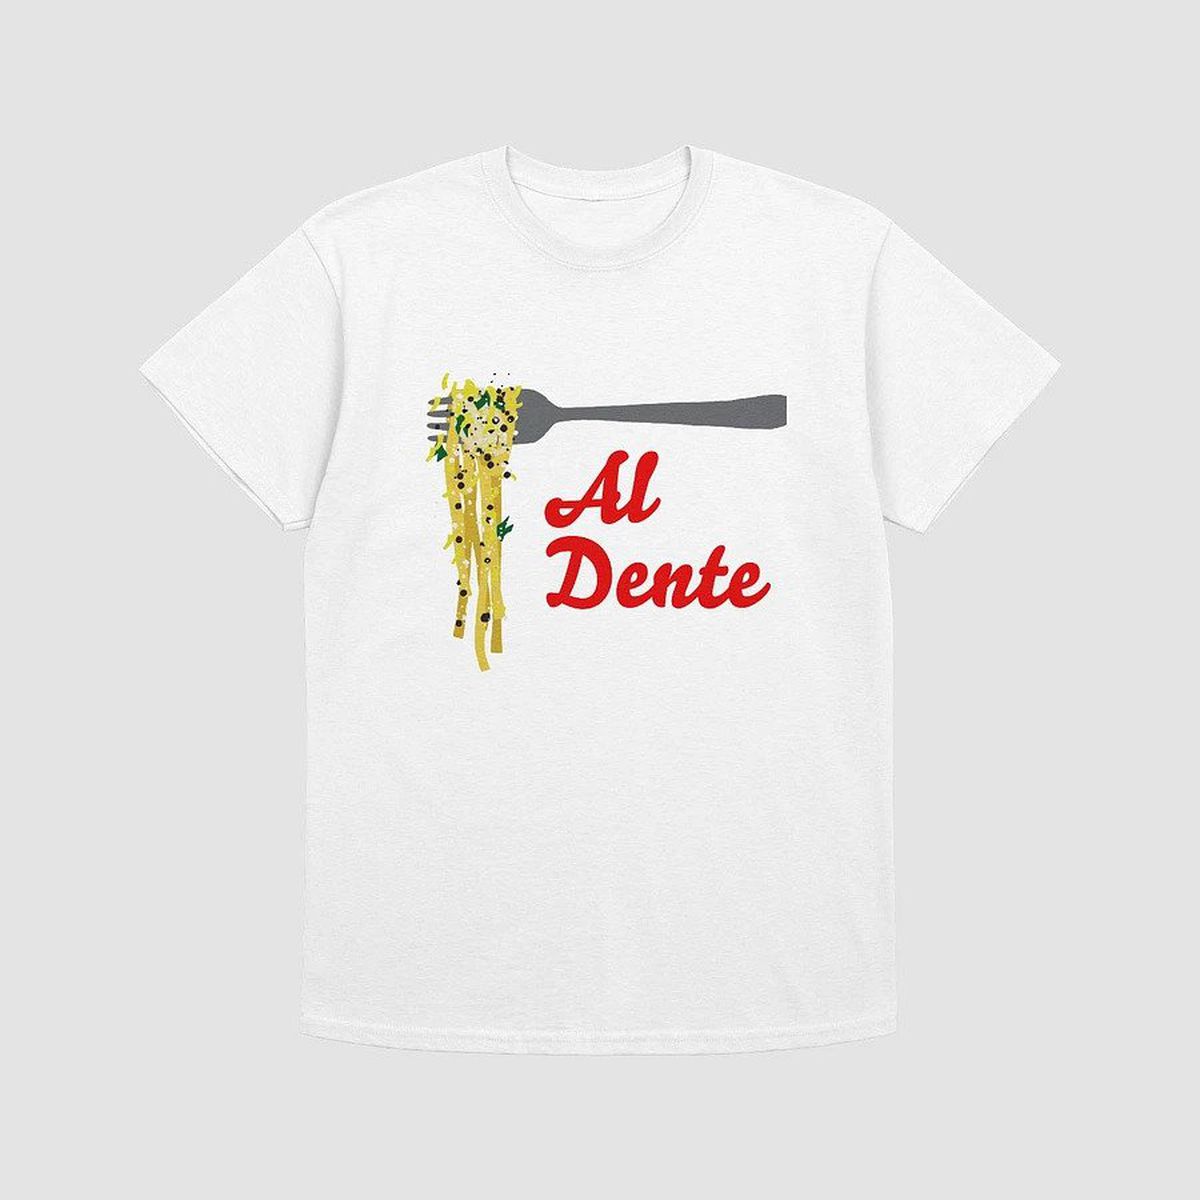 A T-shirt with the image of a fork holding spaghetti aloft and the words “Al Dente”